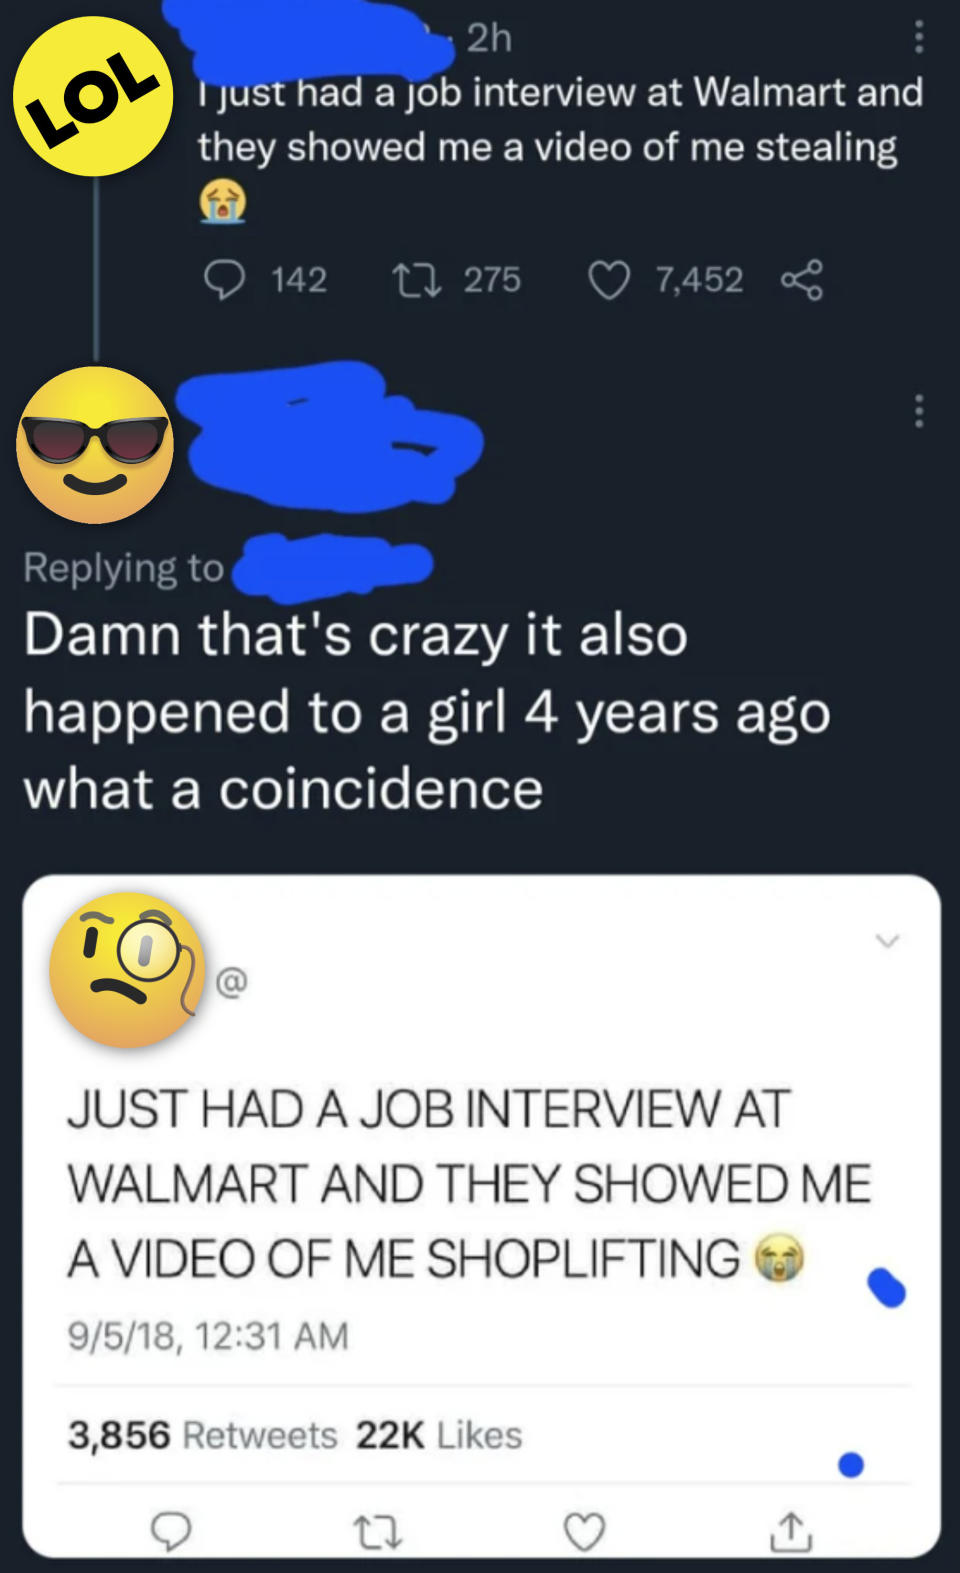 Social media exchange from someone saying, "Just had a job interview at Walmart and they showed me a video of me shoplifting."